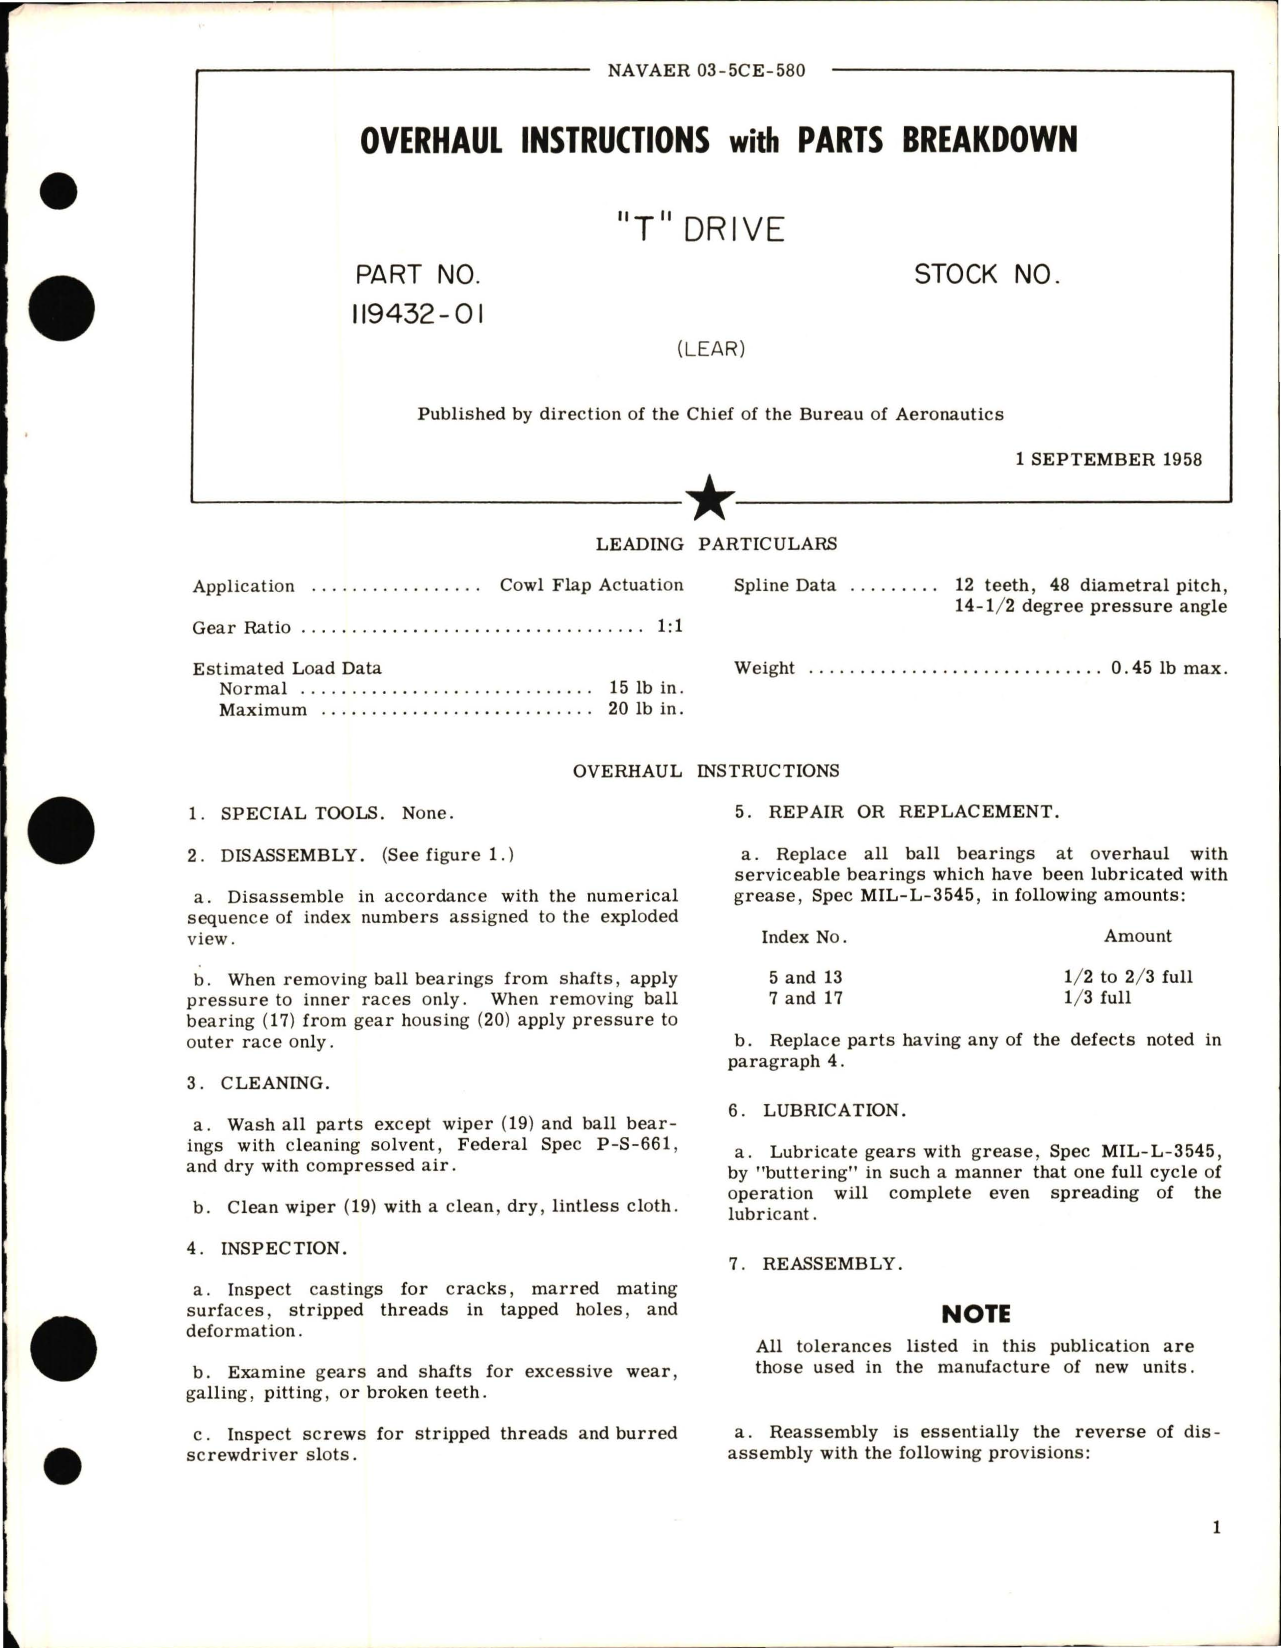 Sample page 1 from AirCorps Library document: Overhaul Instructions with Parts Breakdown for T Drive - Part 119432-01